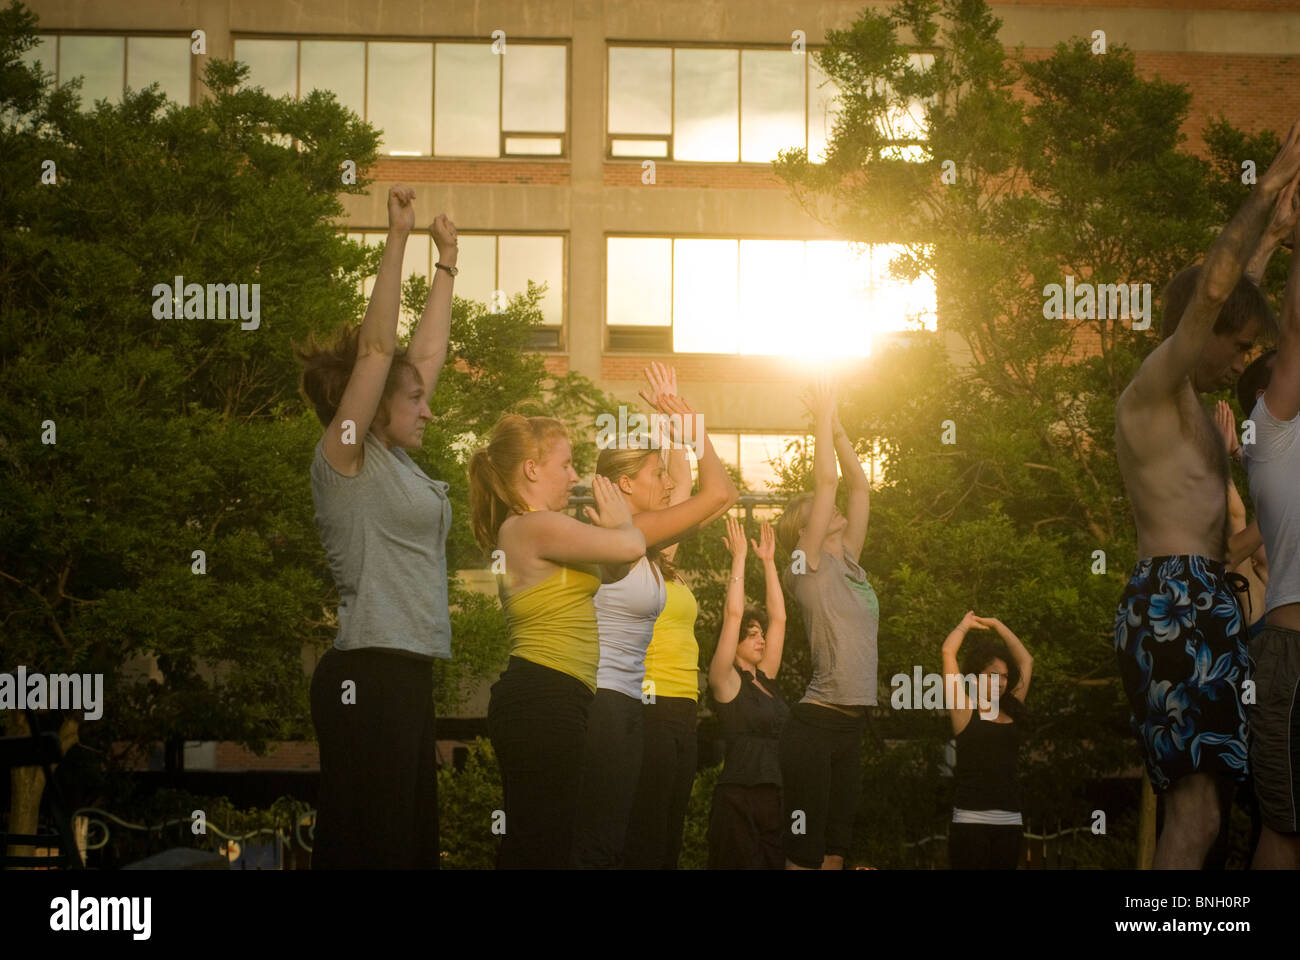 Yoga practitioners participate in a free yoga class in the New York neighborhood of Chelsea Stock Photo